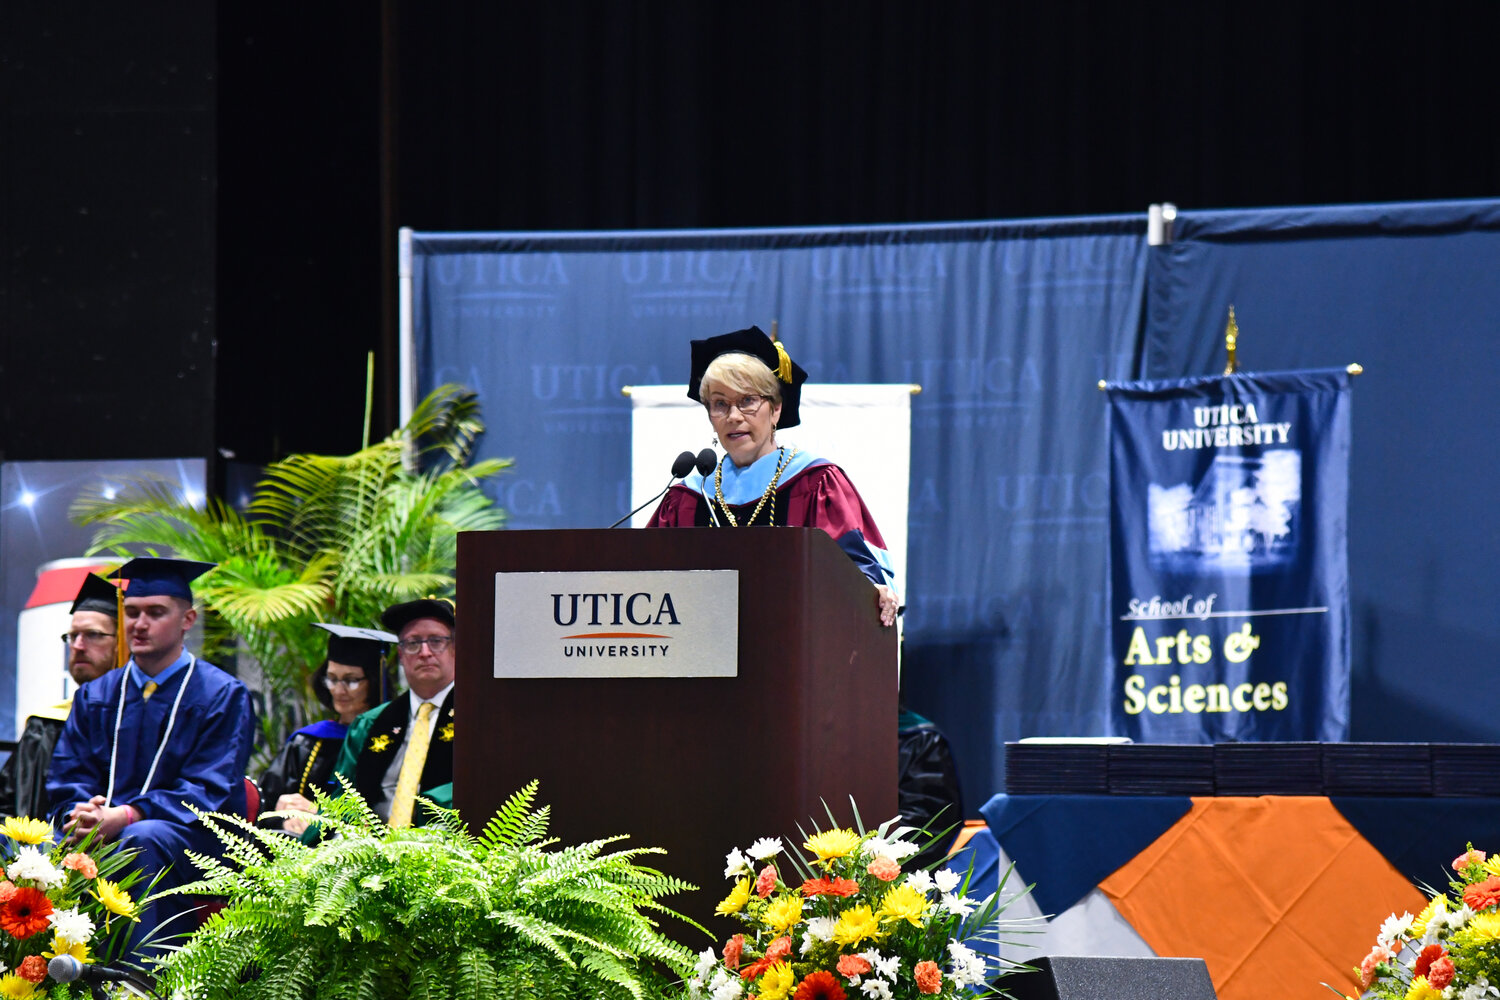 Laura Casamento, retiring president of Utica University, delivered her final undergraduate speech to the class of 2023, as she will be retiring this August. Todd Pfannestiel, the university's provost, will be taking her place as president upon her departure.